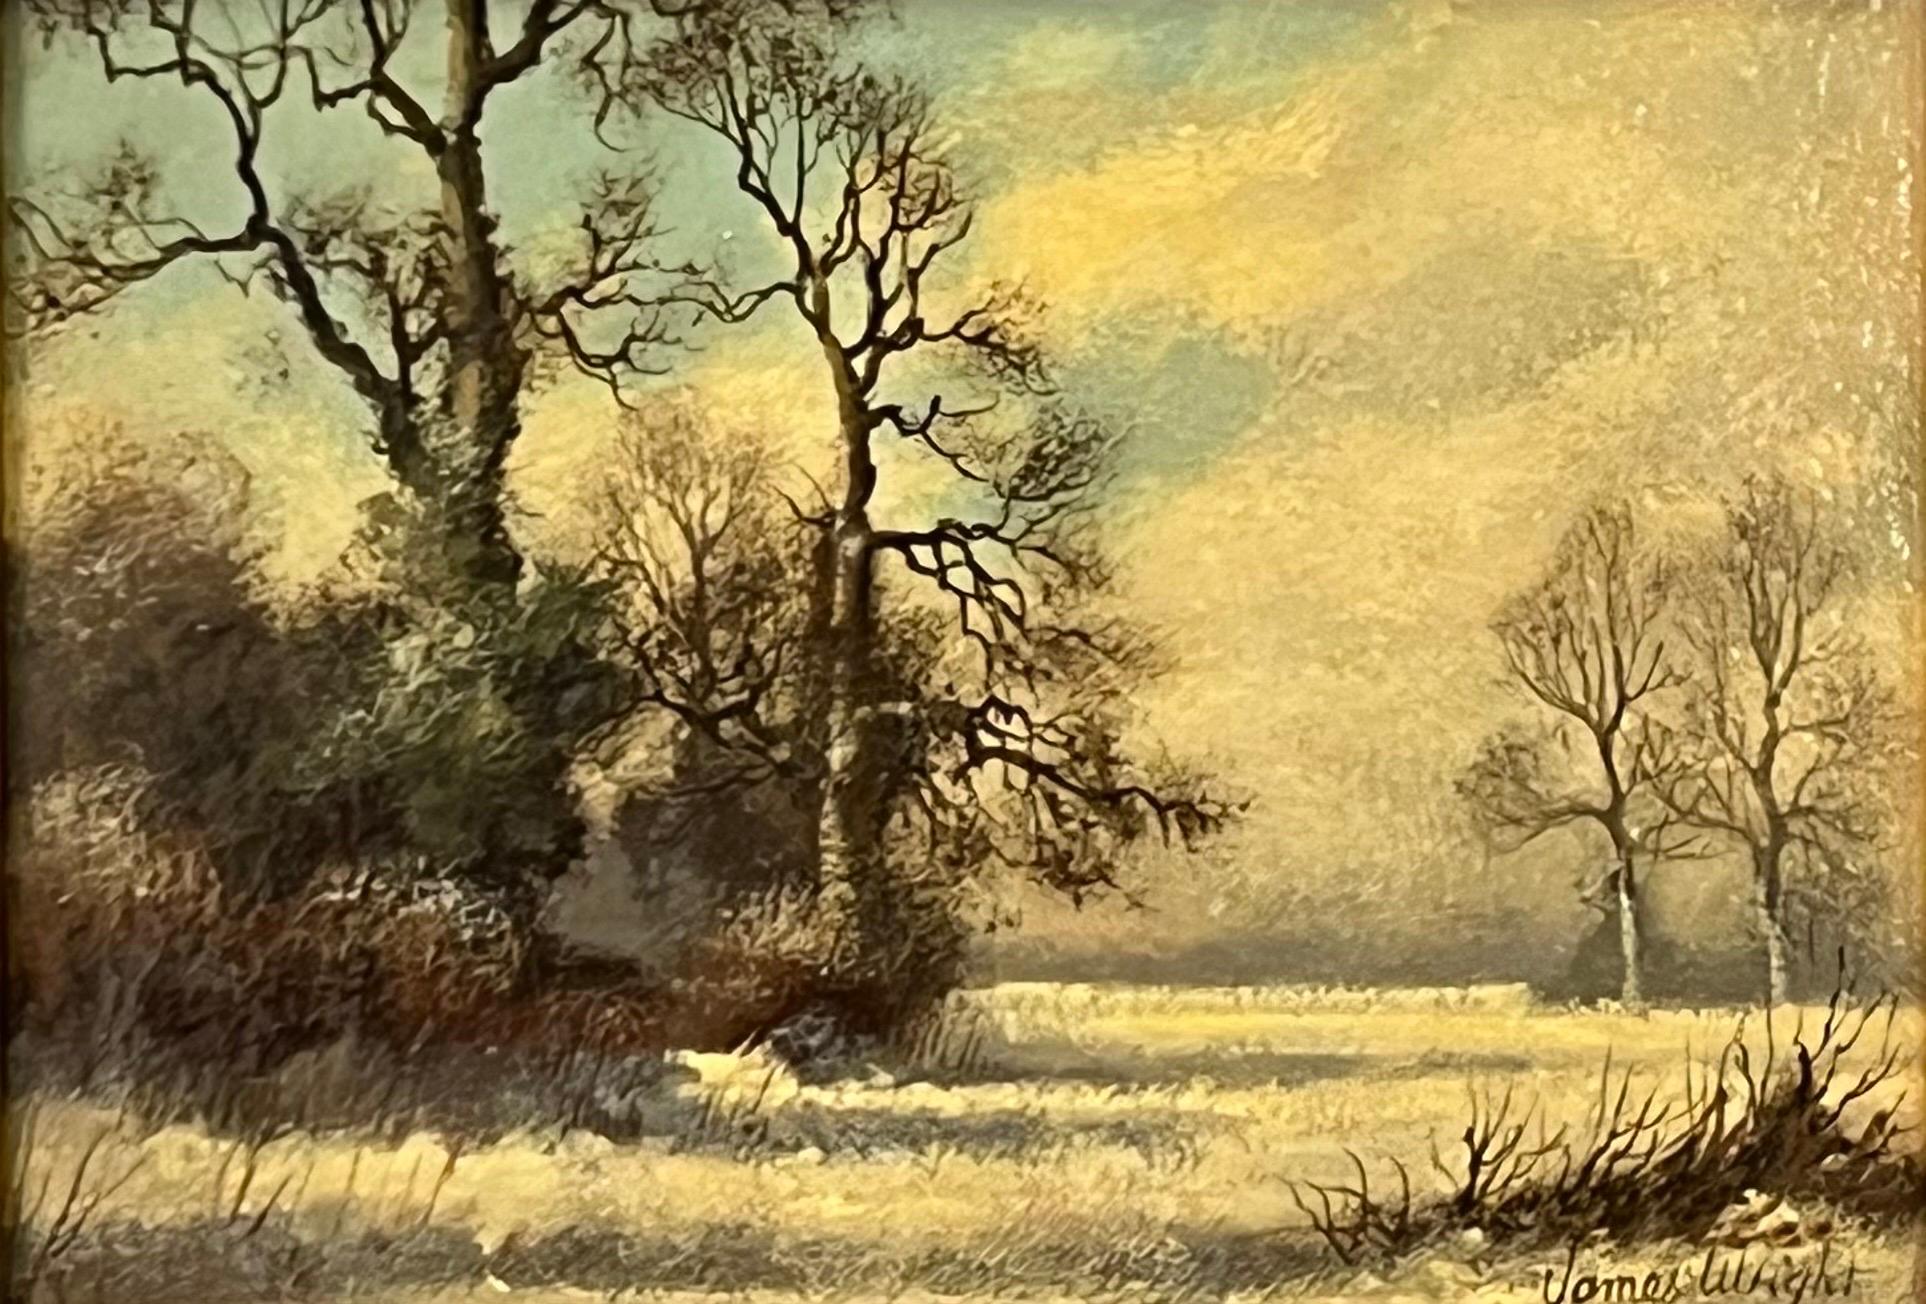 Rural Winter Landscape Scene with Snow & Winter Trees in the English Countryside by 20th Century British Artist, James Wright 
Signed, Original, Oil on Canvas, housed in a beautiful ornate gold frame. 
Provenance: Part of the English Heritage Series